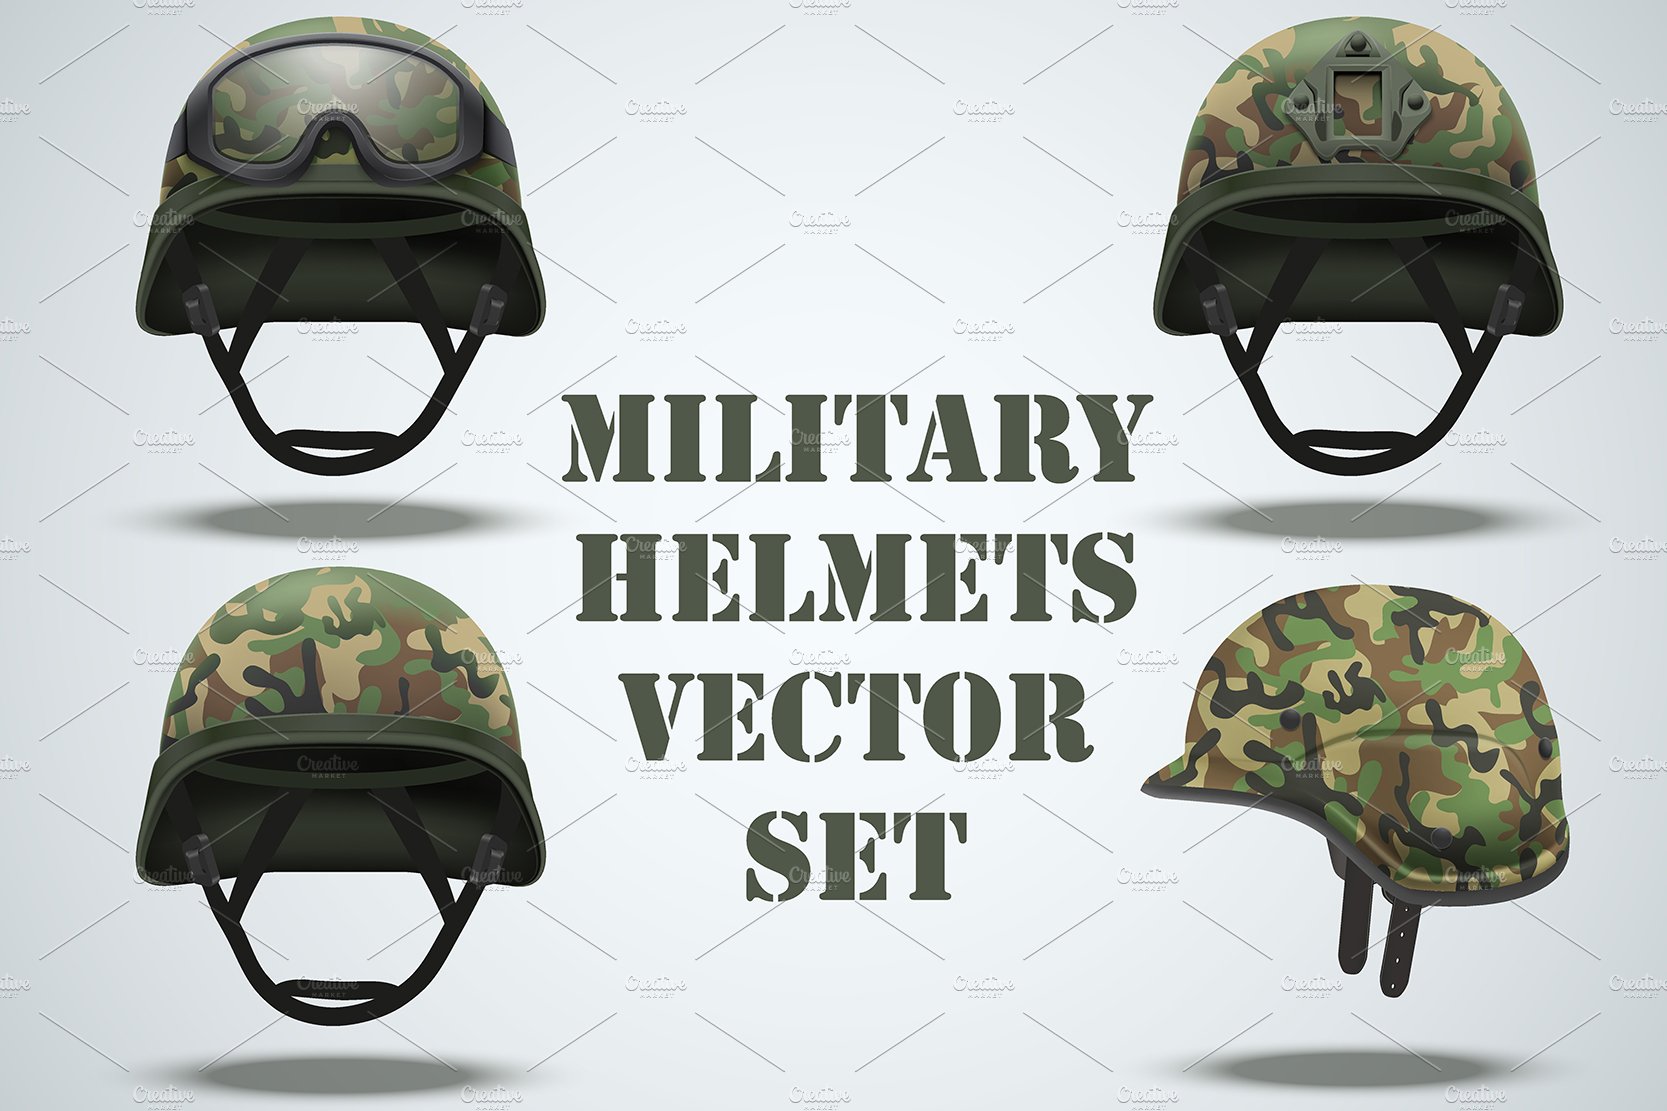 Set of Military camouflage helmets cover image.